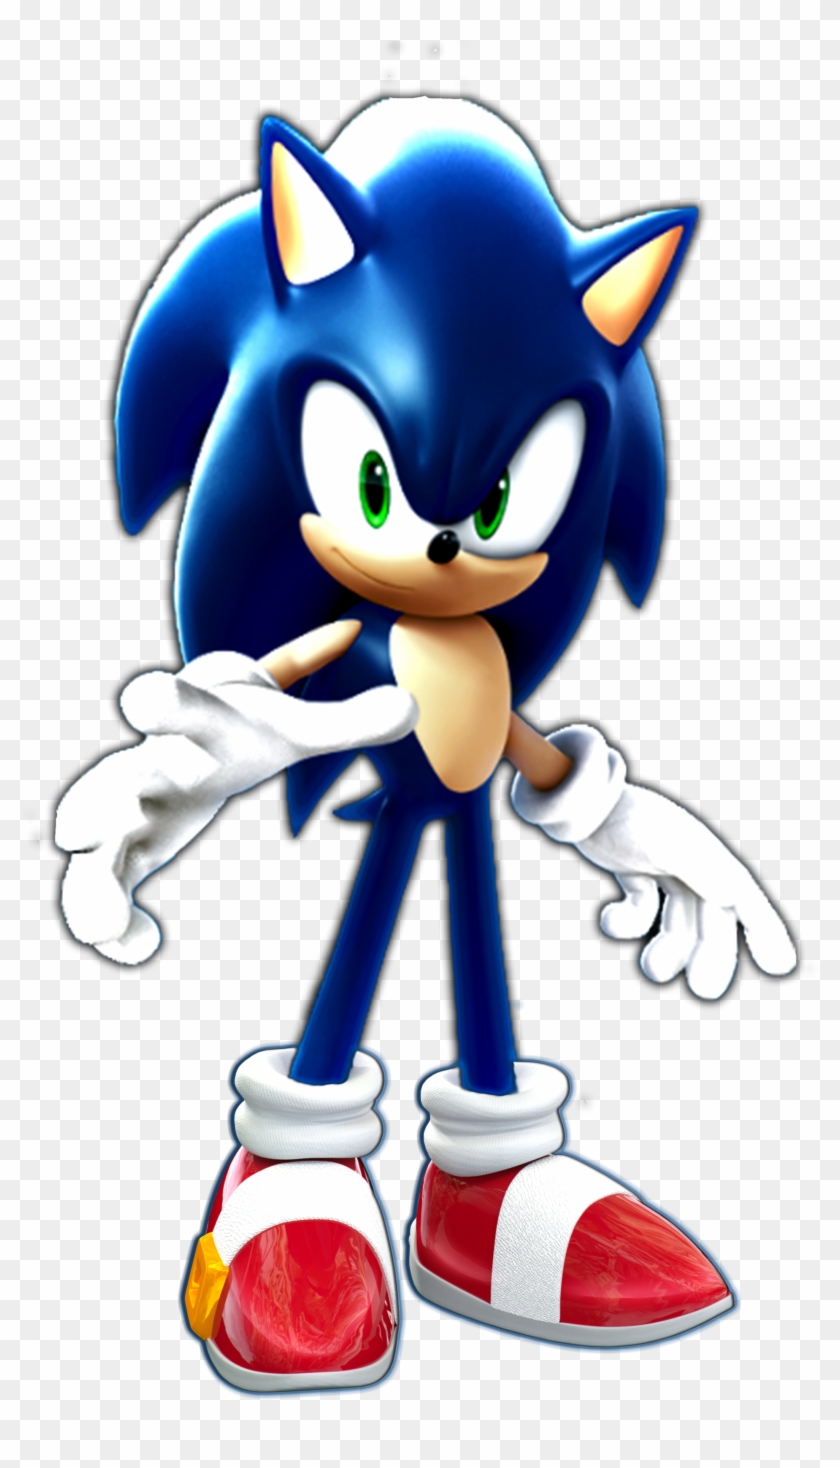 Sonic The Hedgehog Clipart Sonicthe - Sonic From Wreck It Ralph #1254511